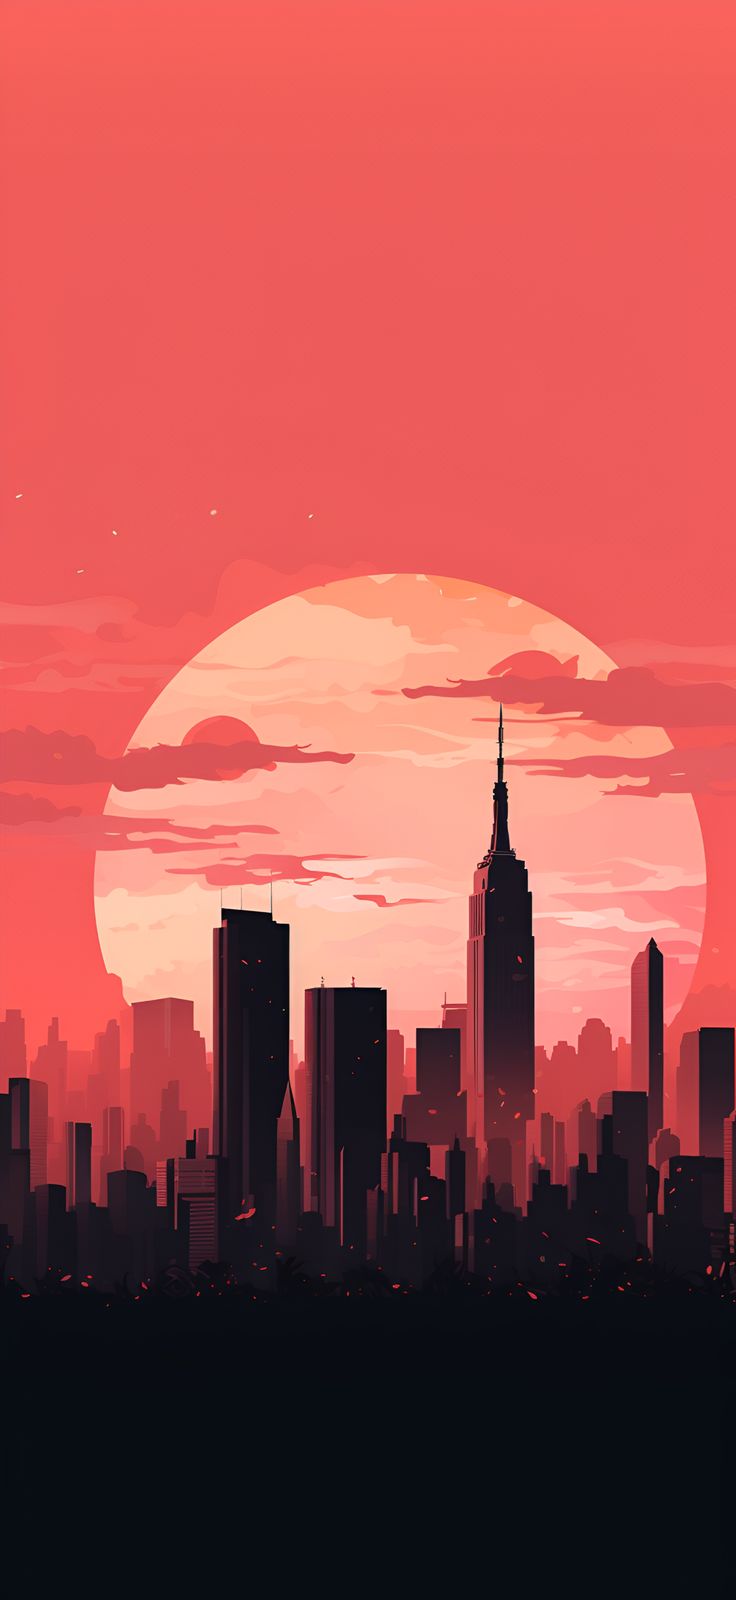 Aesthetic Wallpaper iPhone and Android Optimized: Minimalist New York City Skyline in Vibrant Coral. Coral wallpaper, Artistic wallpaper, City silhouette